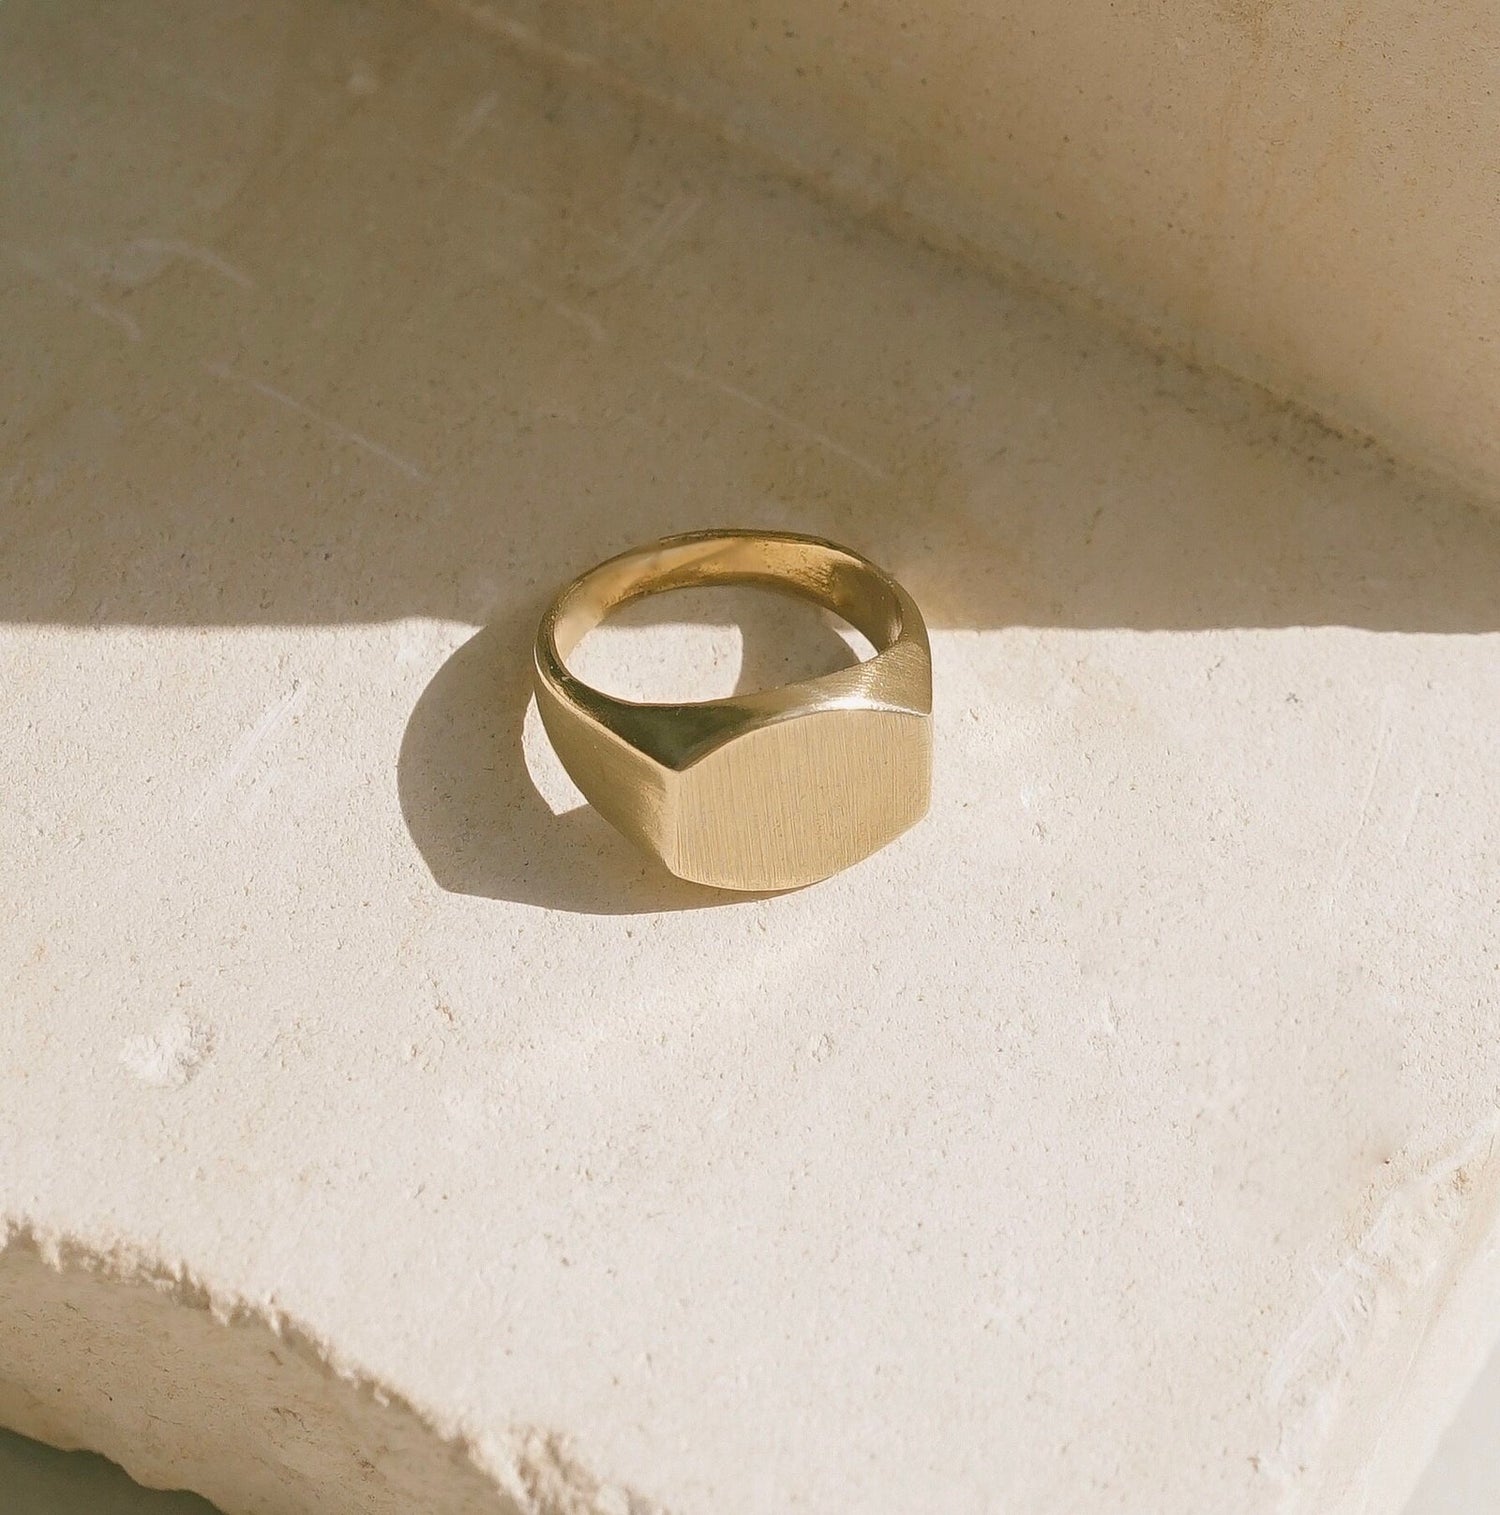 Unisex vintage inspired flat top Signet ring. Handmade with recycled materials in the Santa Cruz mountains.